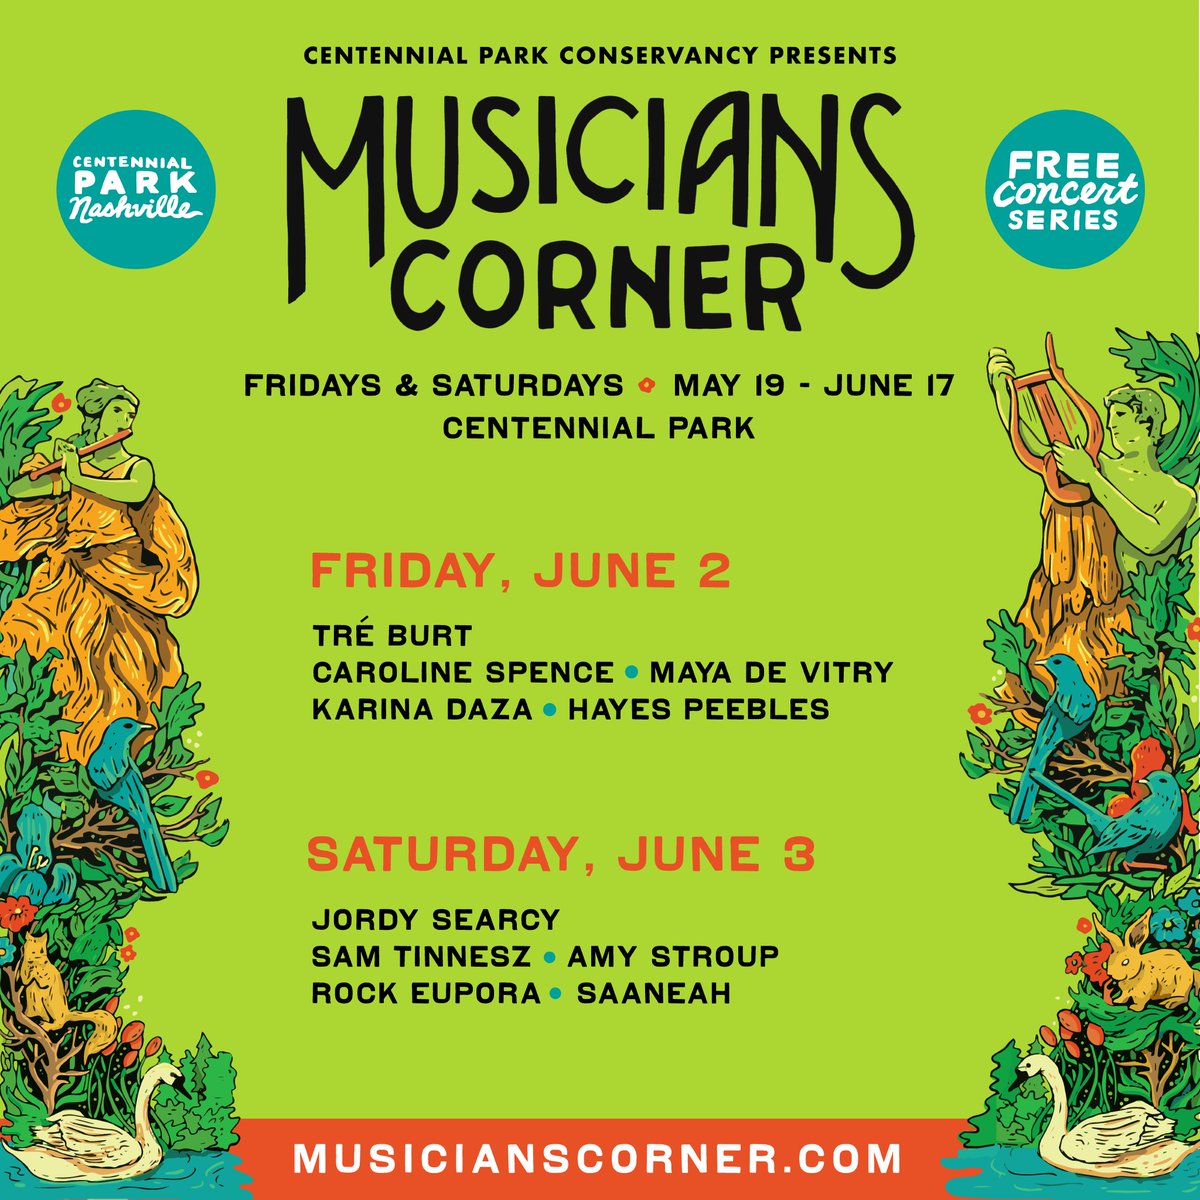 We've got a great weekend of music ahead of us at @MusCornerNash! How many sets are you trying to catch out at Centennial park? We'll be clocking in at 10/10 🔥